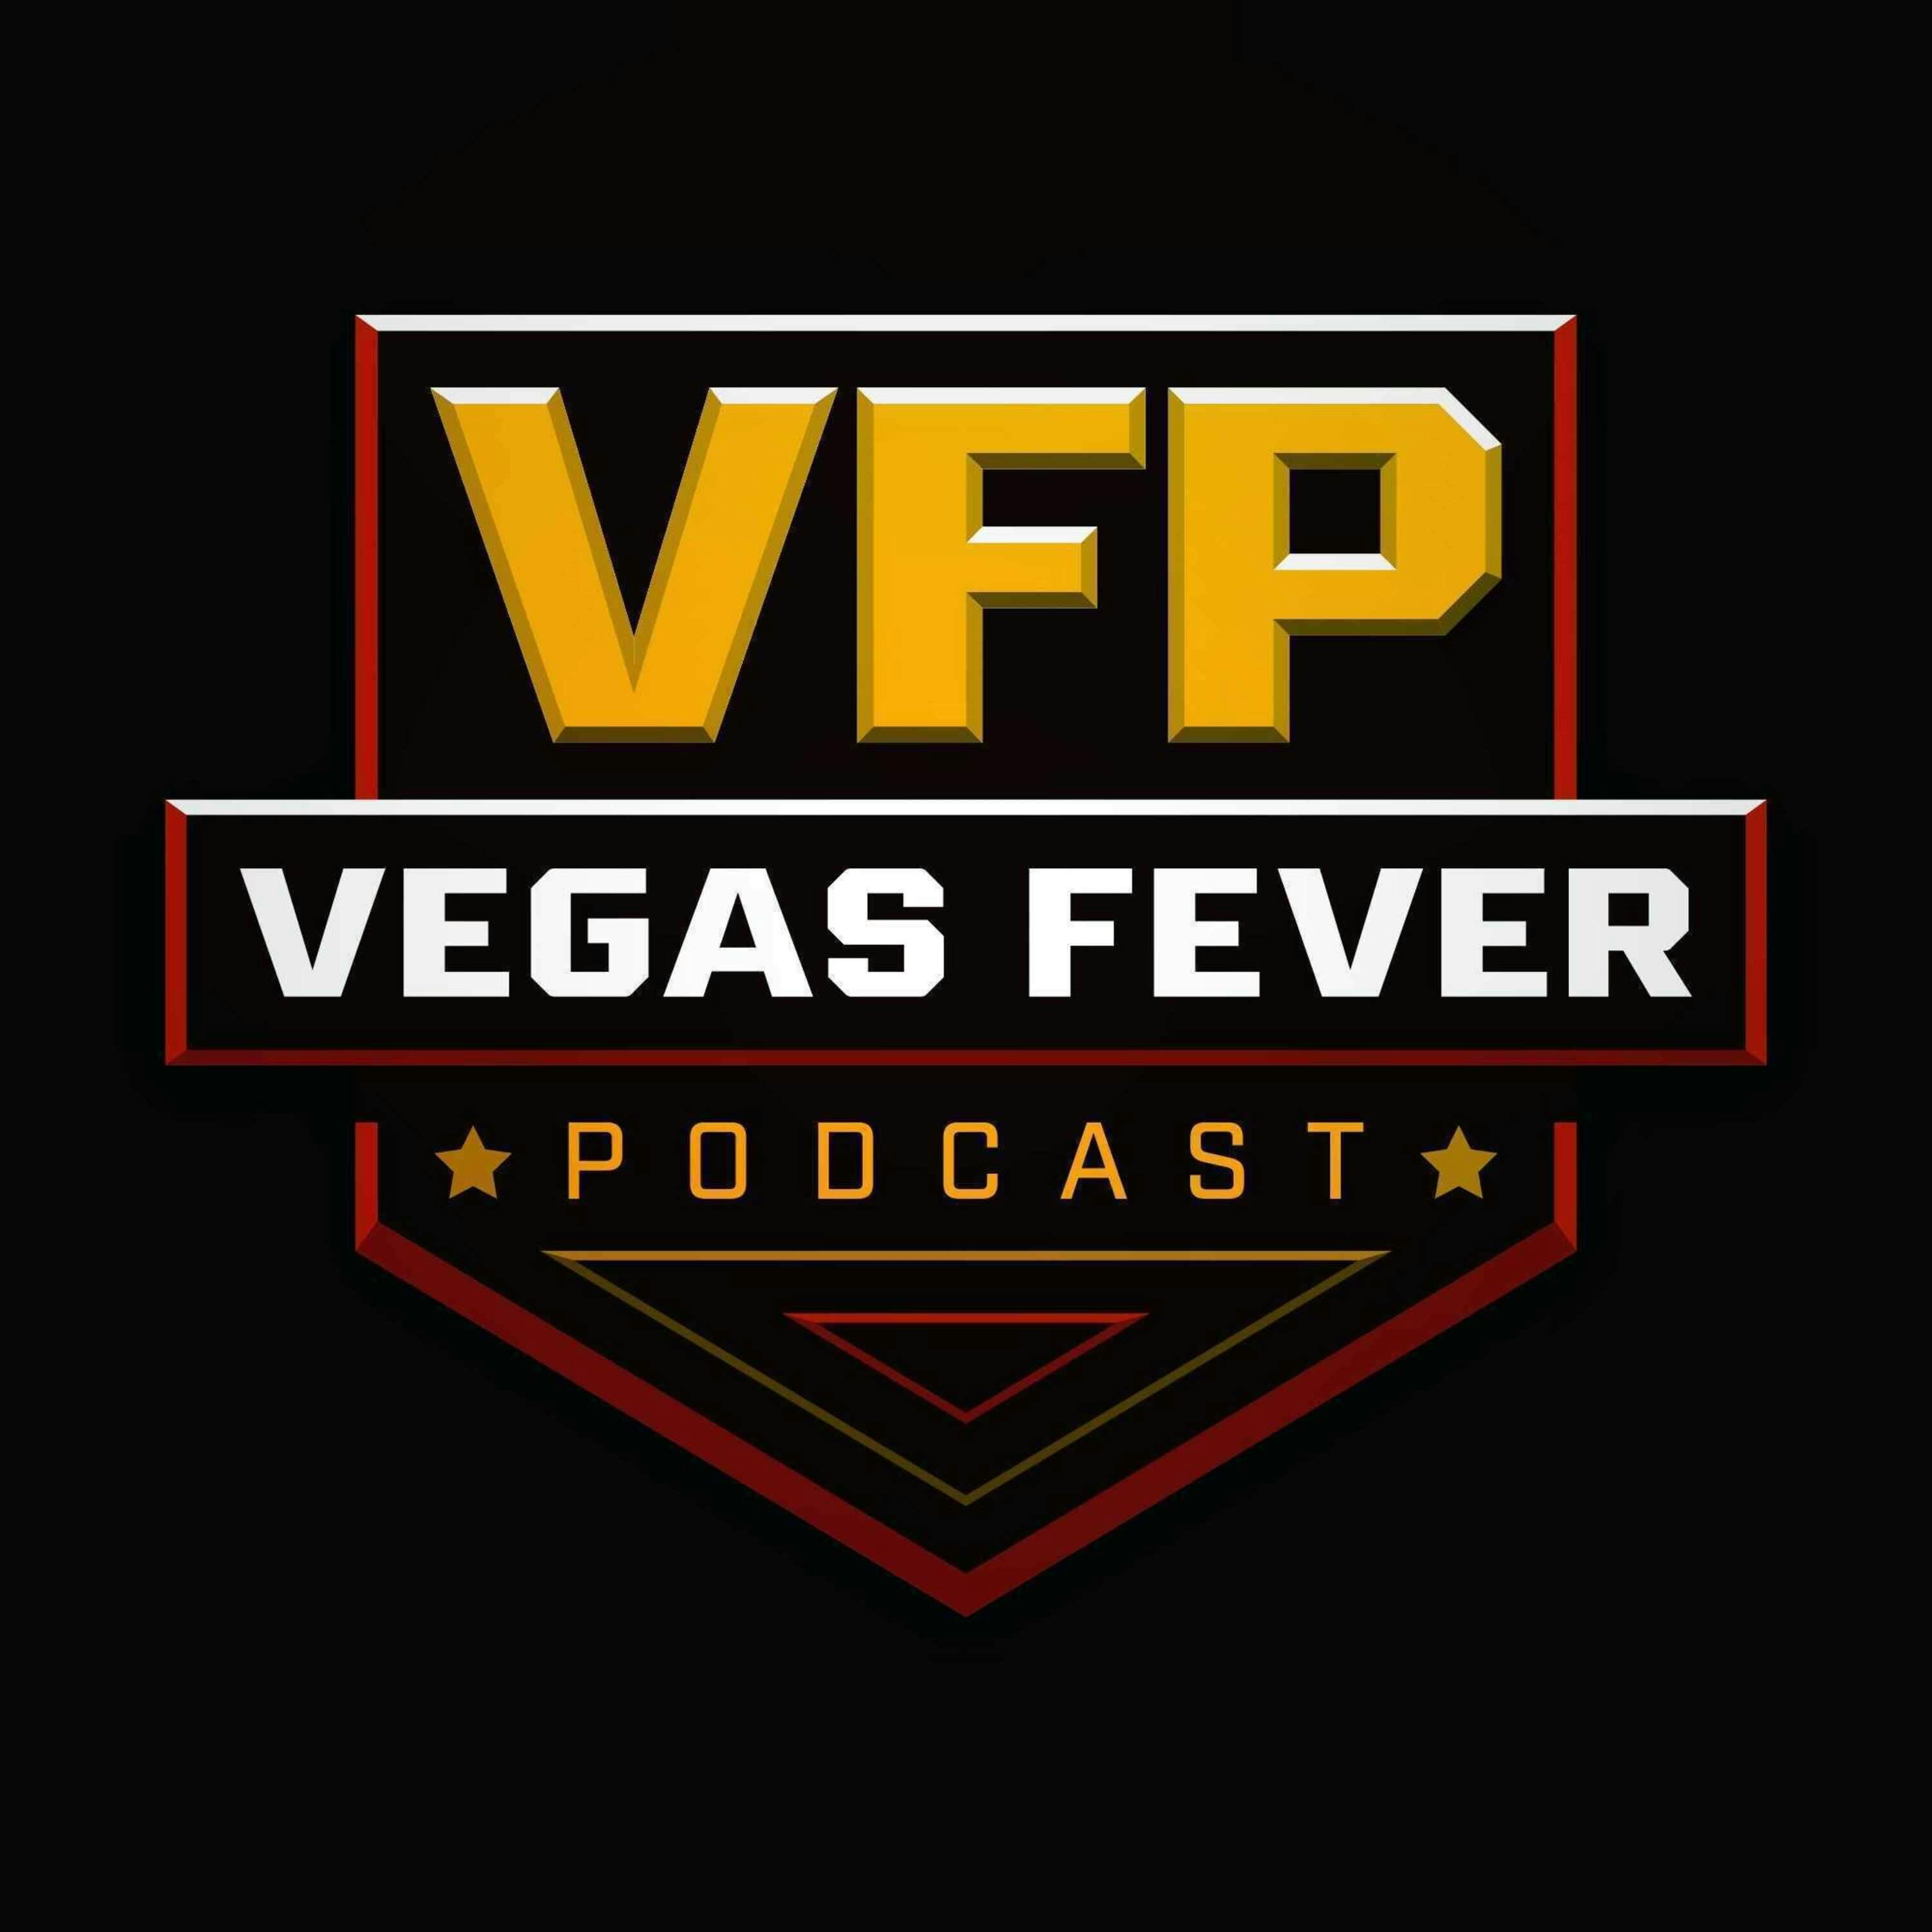 A big road trip for the VGK,UNLV’s underachieving conference season& a big MLS to Vegas announcement